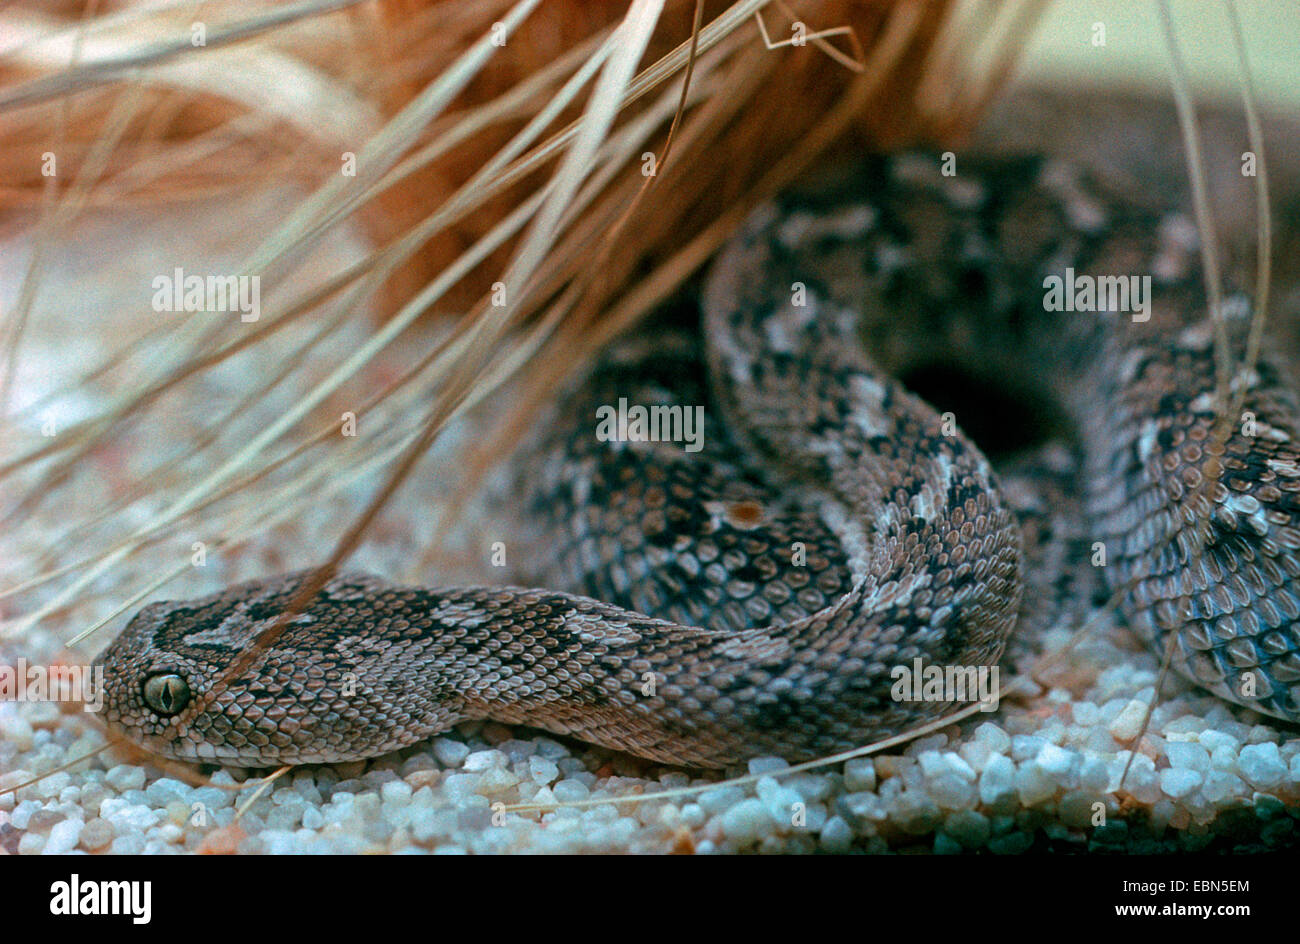 saw-scaled viper, saw-scaled adder (Echis carinatus), one of the most poisonous snakes, creeping on gravel Stock Photo